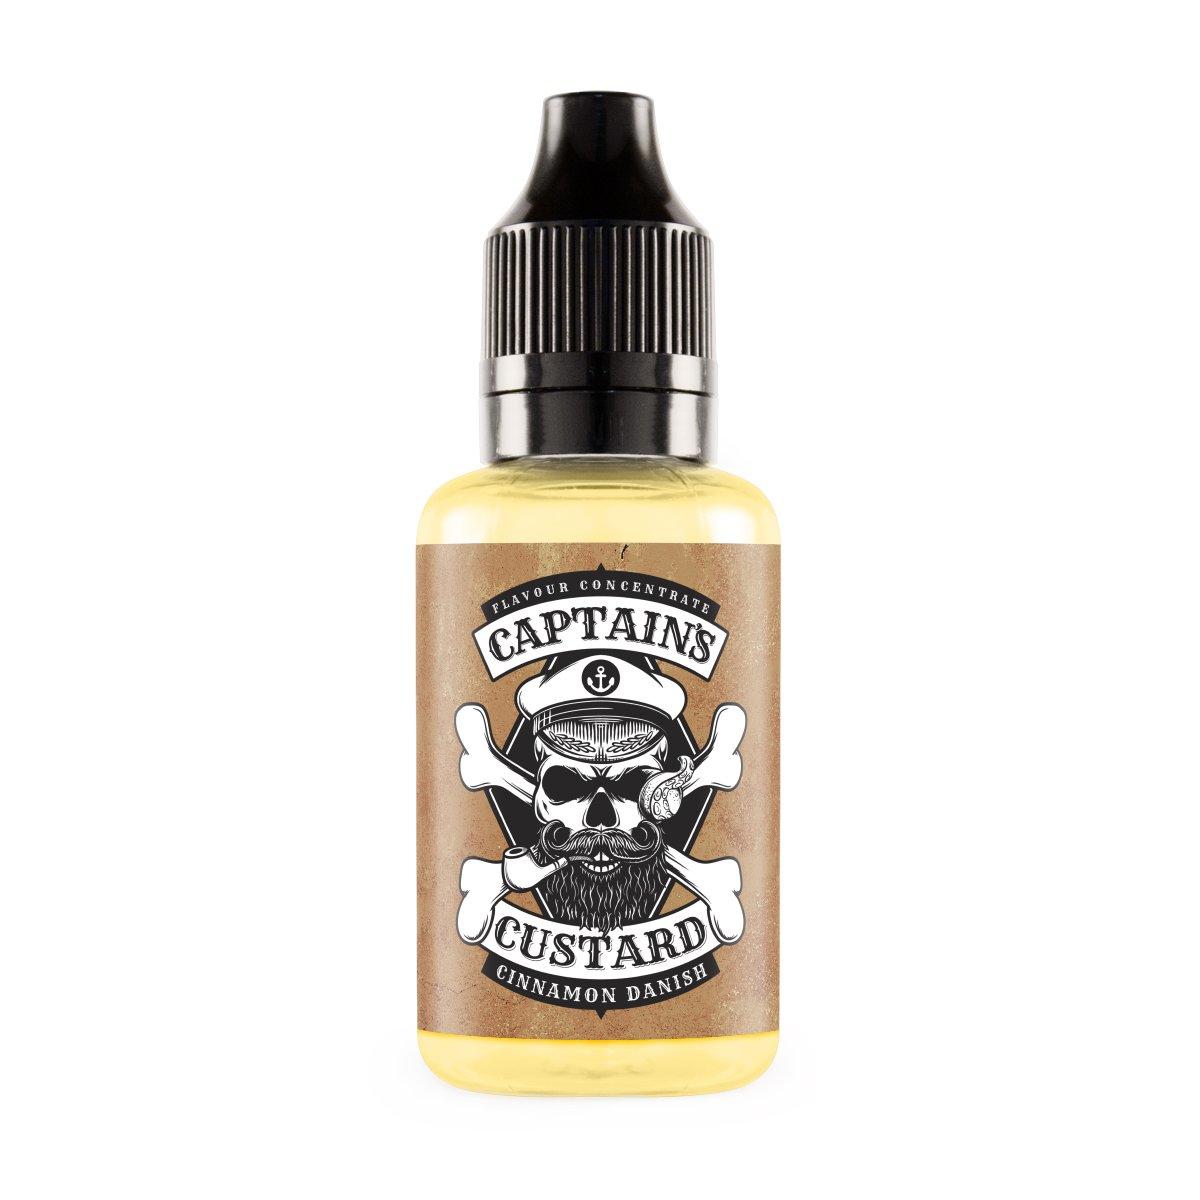 Cinnamon Danish Flavour Concentrate by Captains Custard